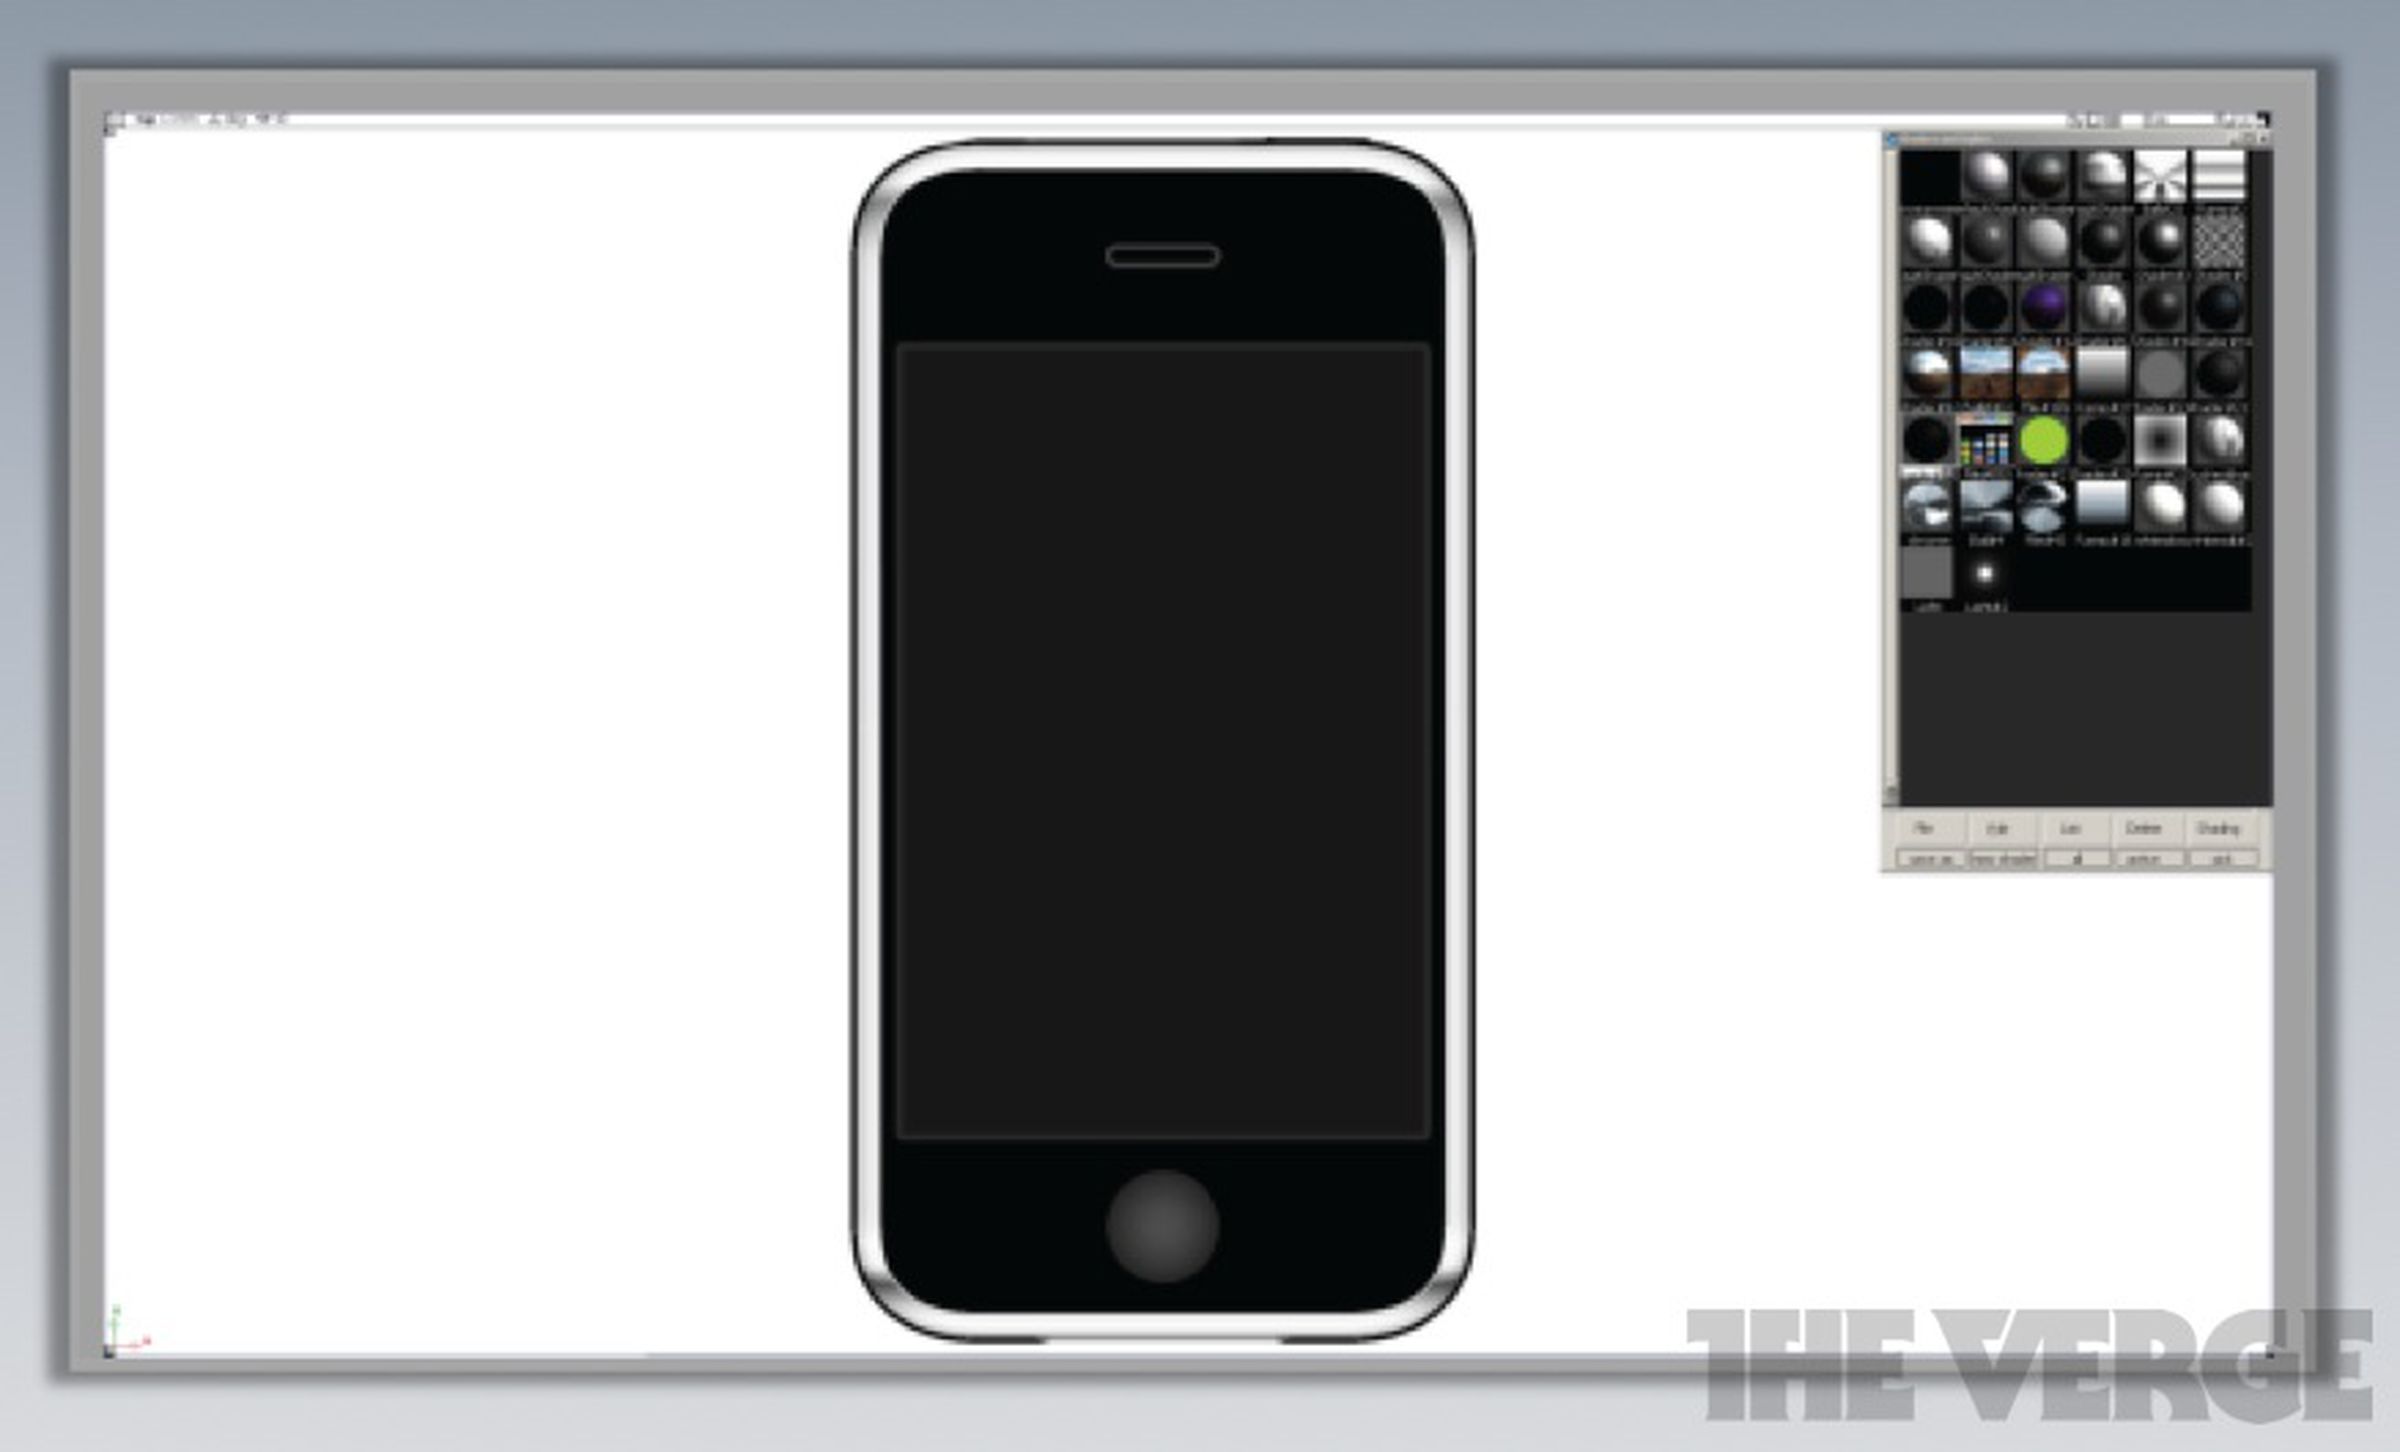 Apple iPhone prototype pictures and CAD files